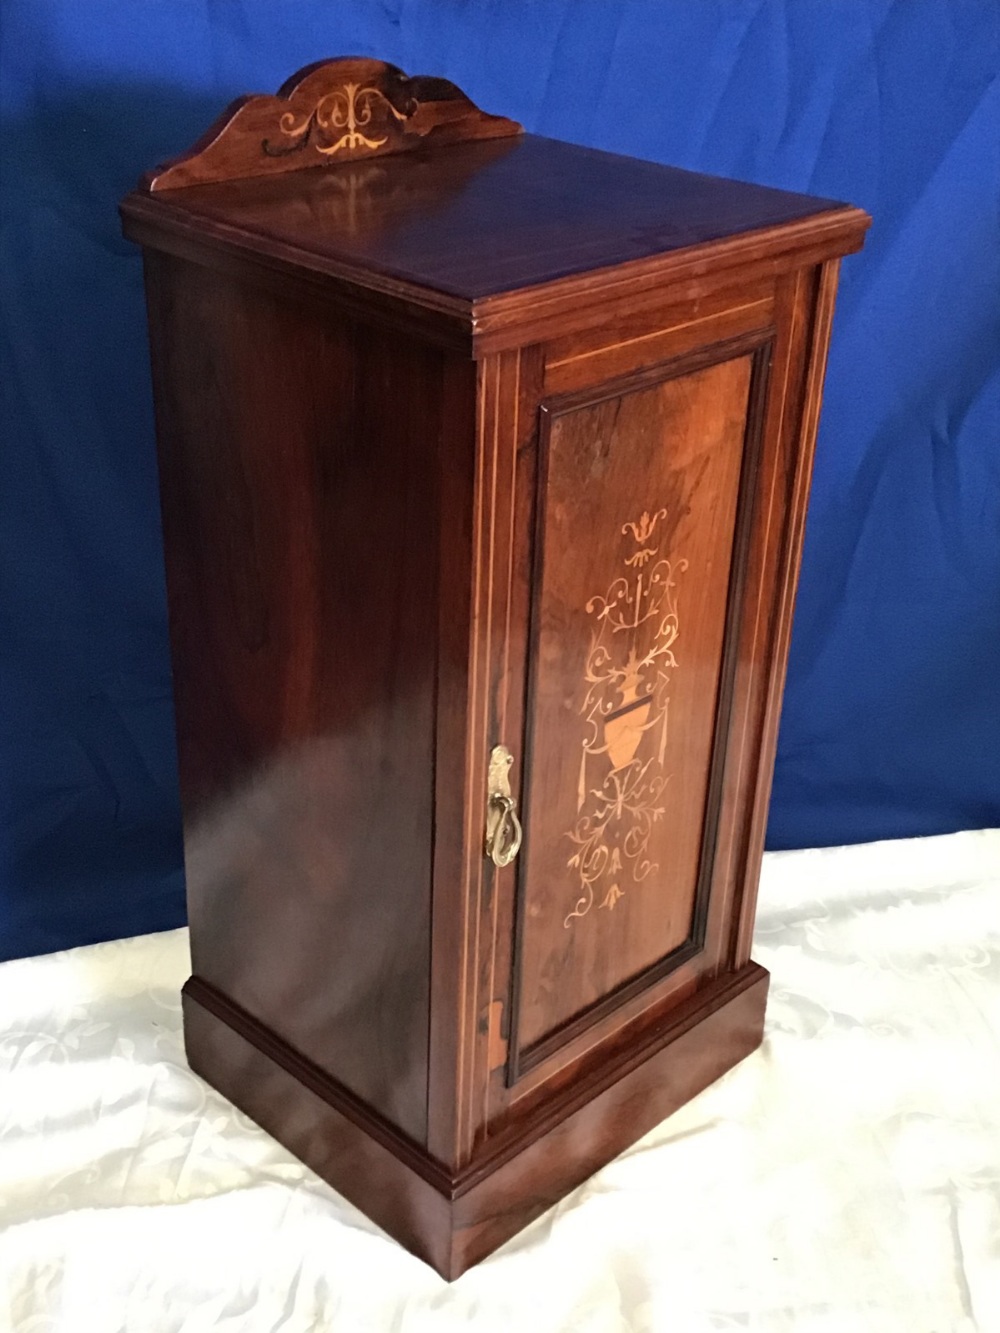 A VERY FINE ROSEWOOD SINGLE DOOR CABINET, with wonderful inlaid decorative detail to the door, - Image 2 of 3